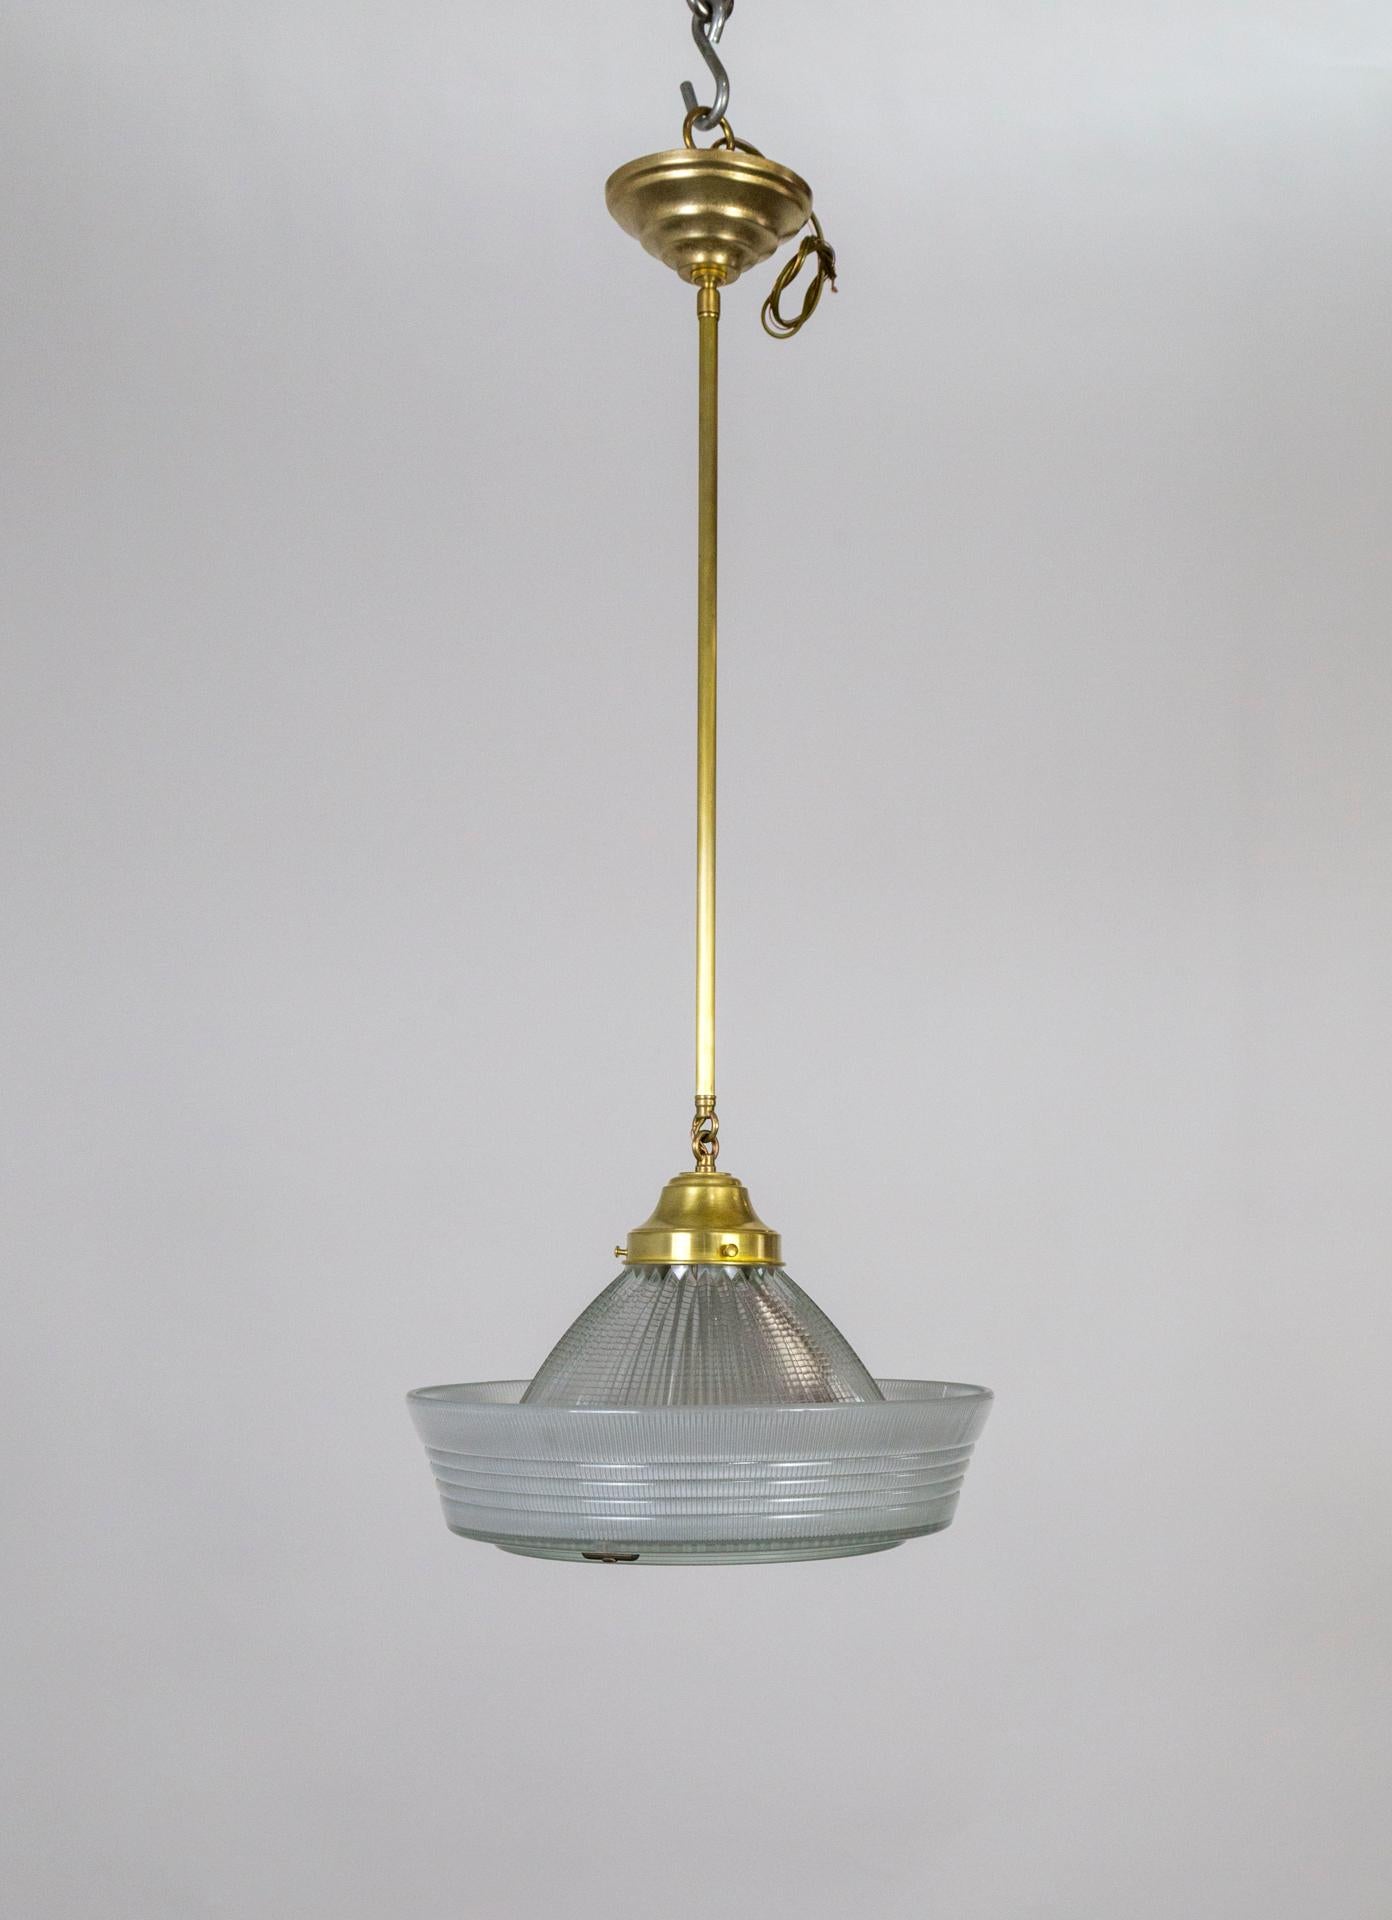 A holophane glass shade in a sailor hat shape with removable under plate, as a pendant light; newly made with a brass holder and long stem. 